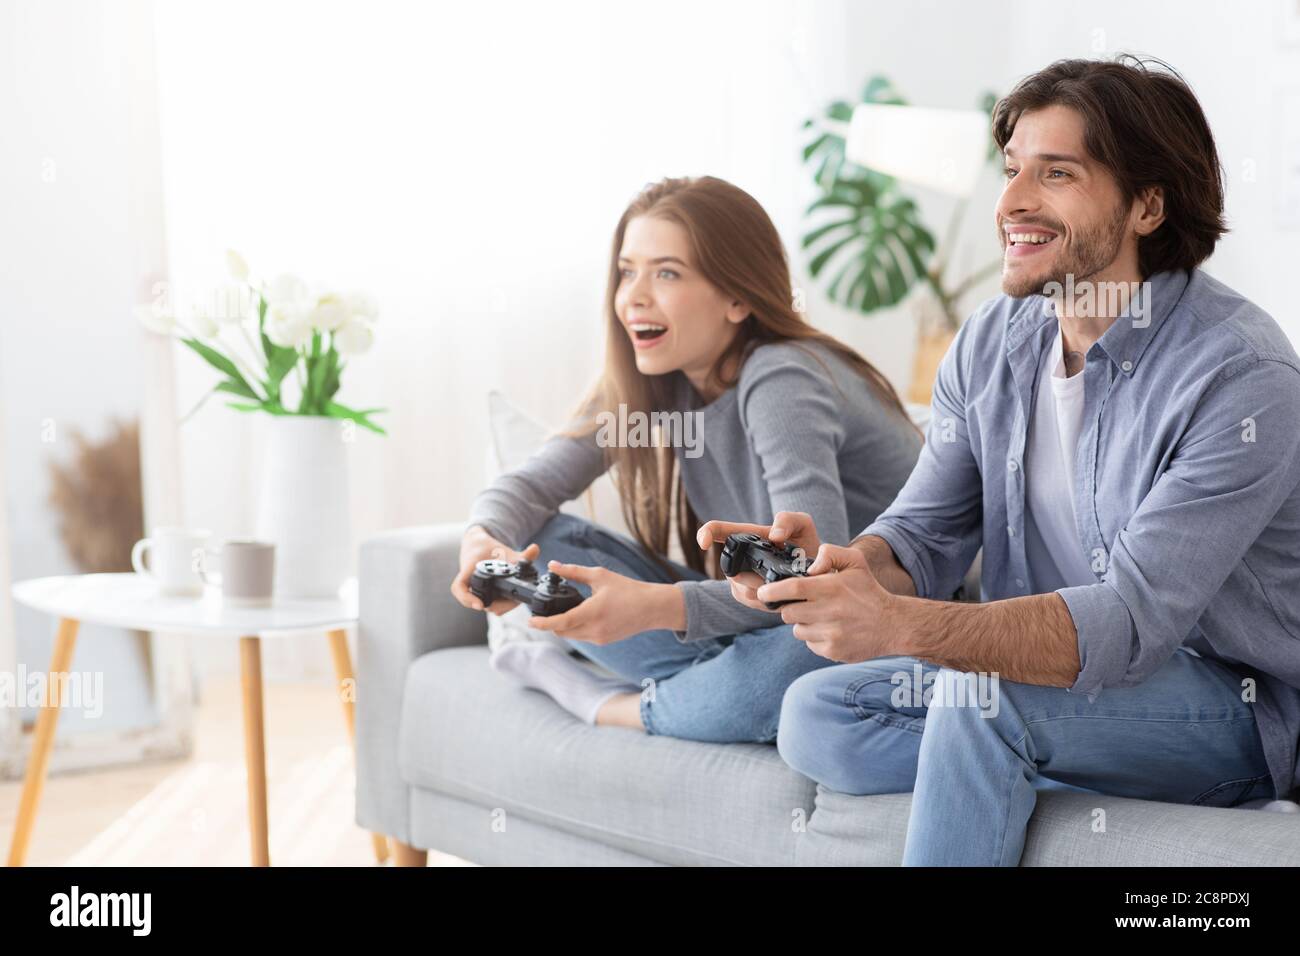 Excited man and woman playing video games at home Stock Photo